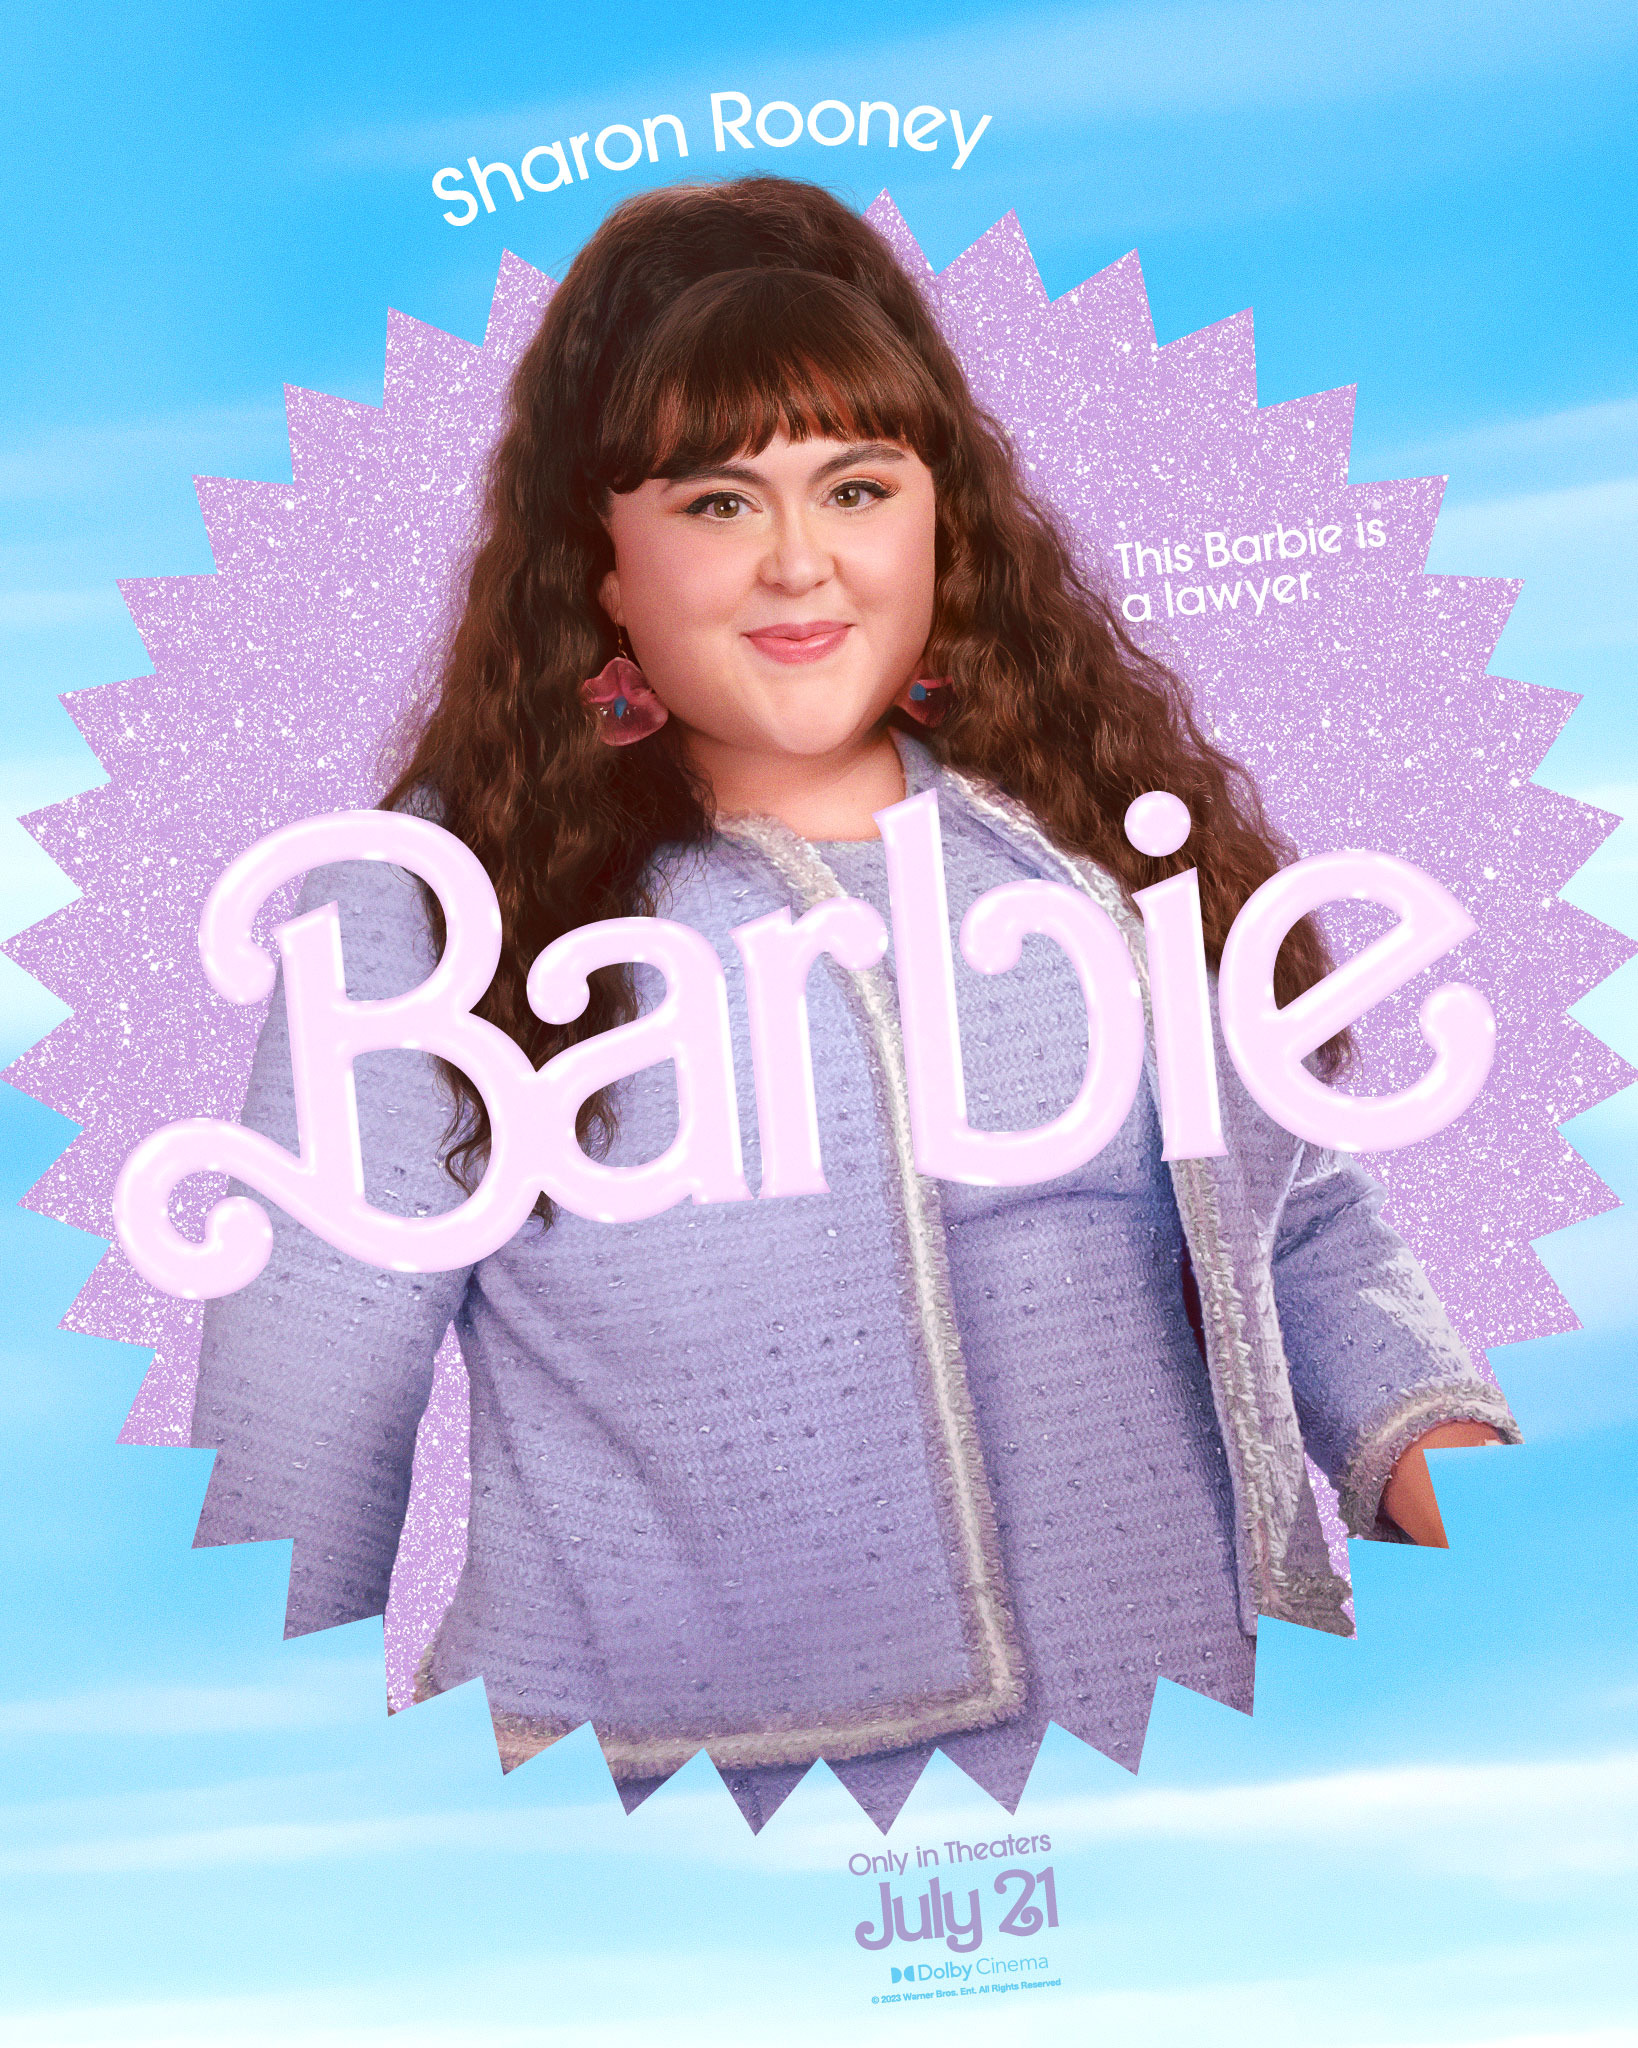 Sharon Rooney as Lawyer Barbie